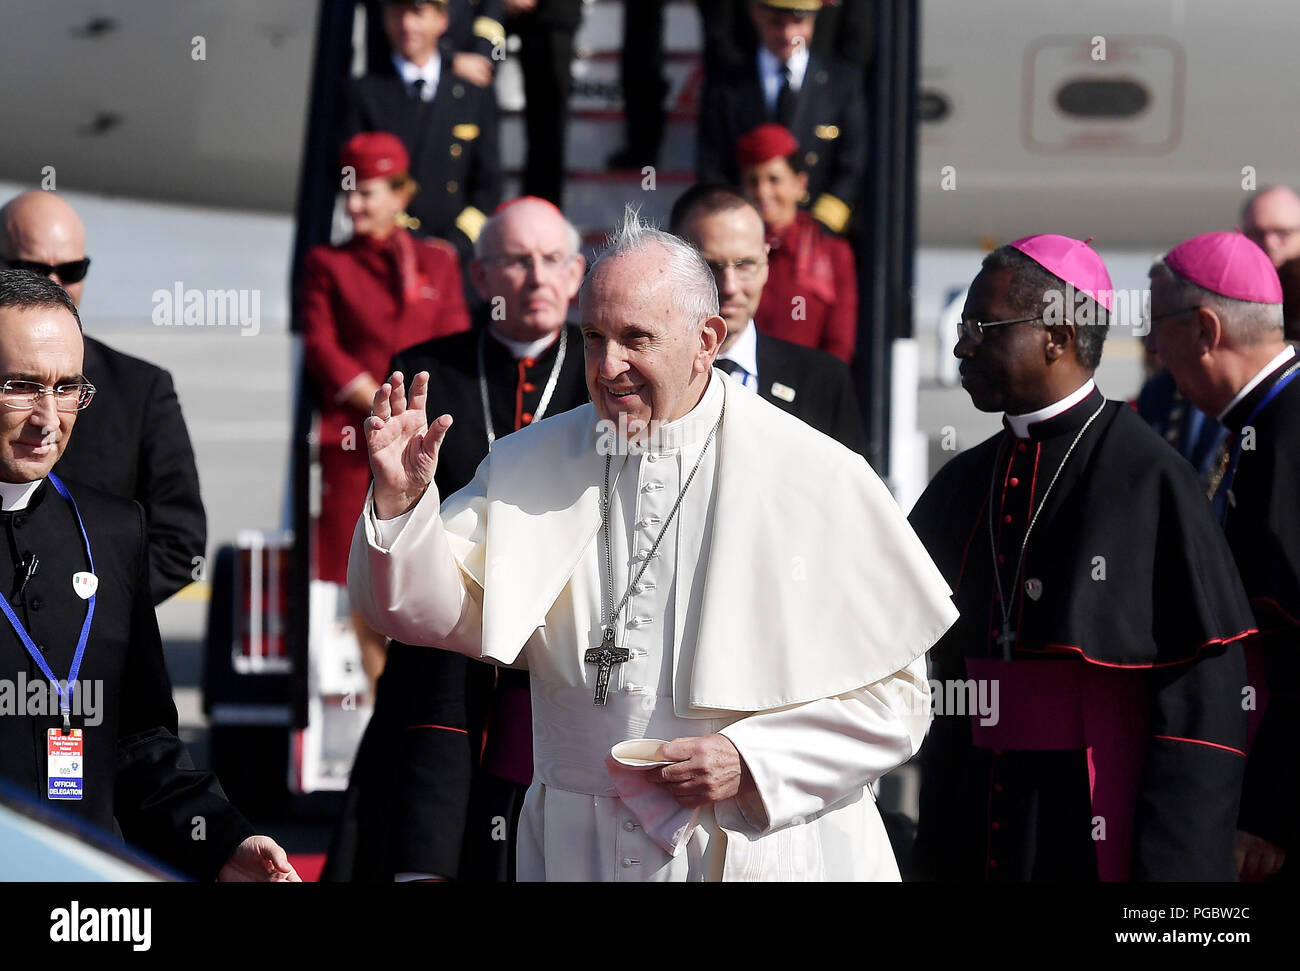 Pope Francis waves to wellwishers as he arrives at Dublin Airport as he arrives at Dublin International Airport, at the start of his visit to Ireland. Stock Photo